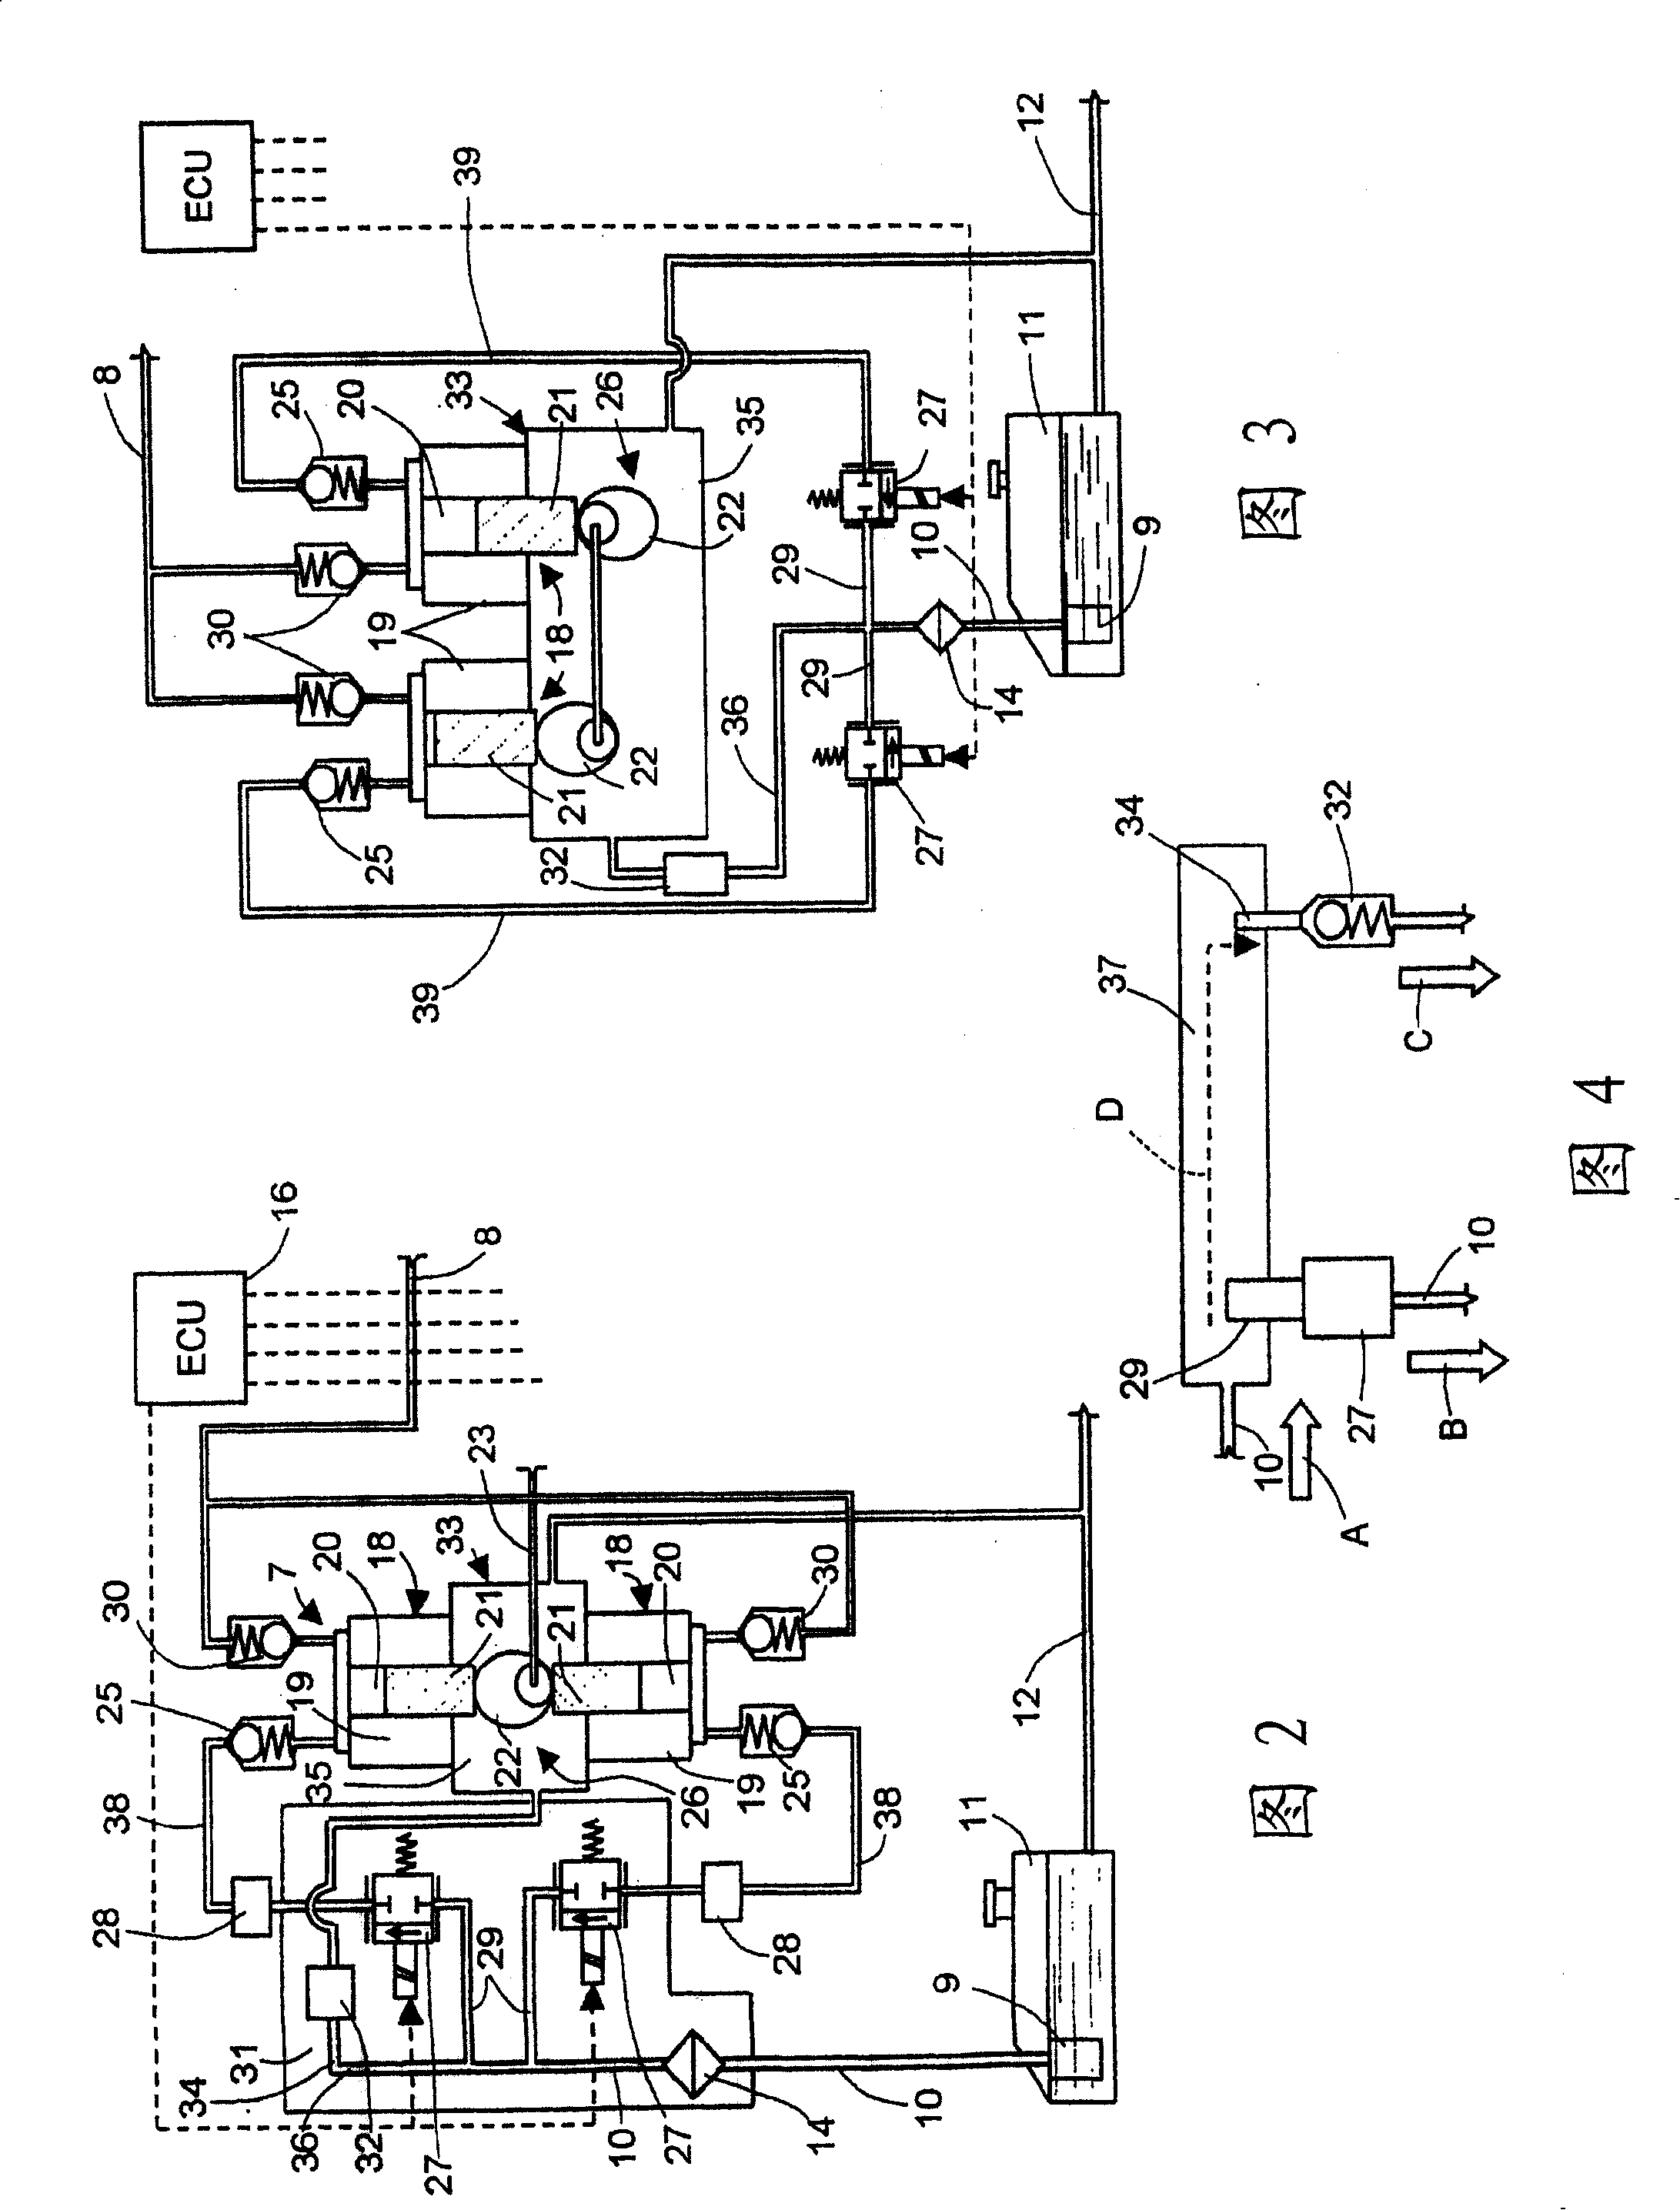 Improvement to a fuel-injection system for an internal-combustion engine